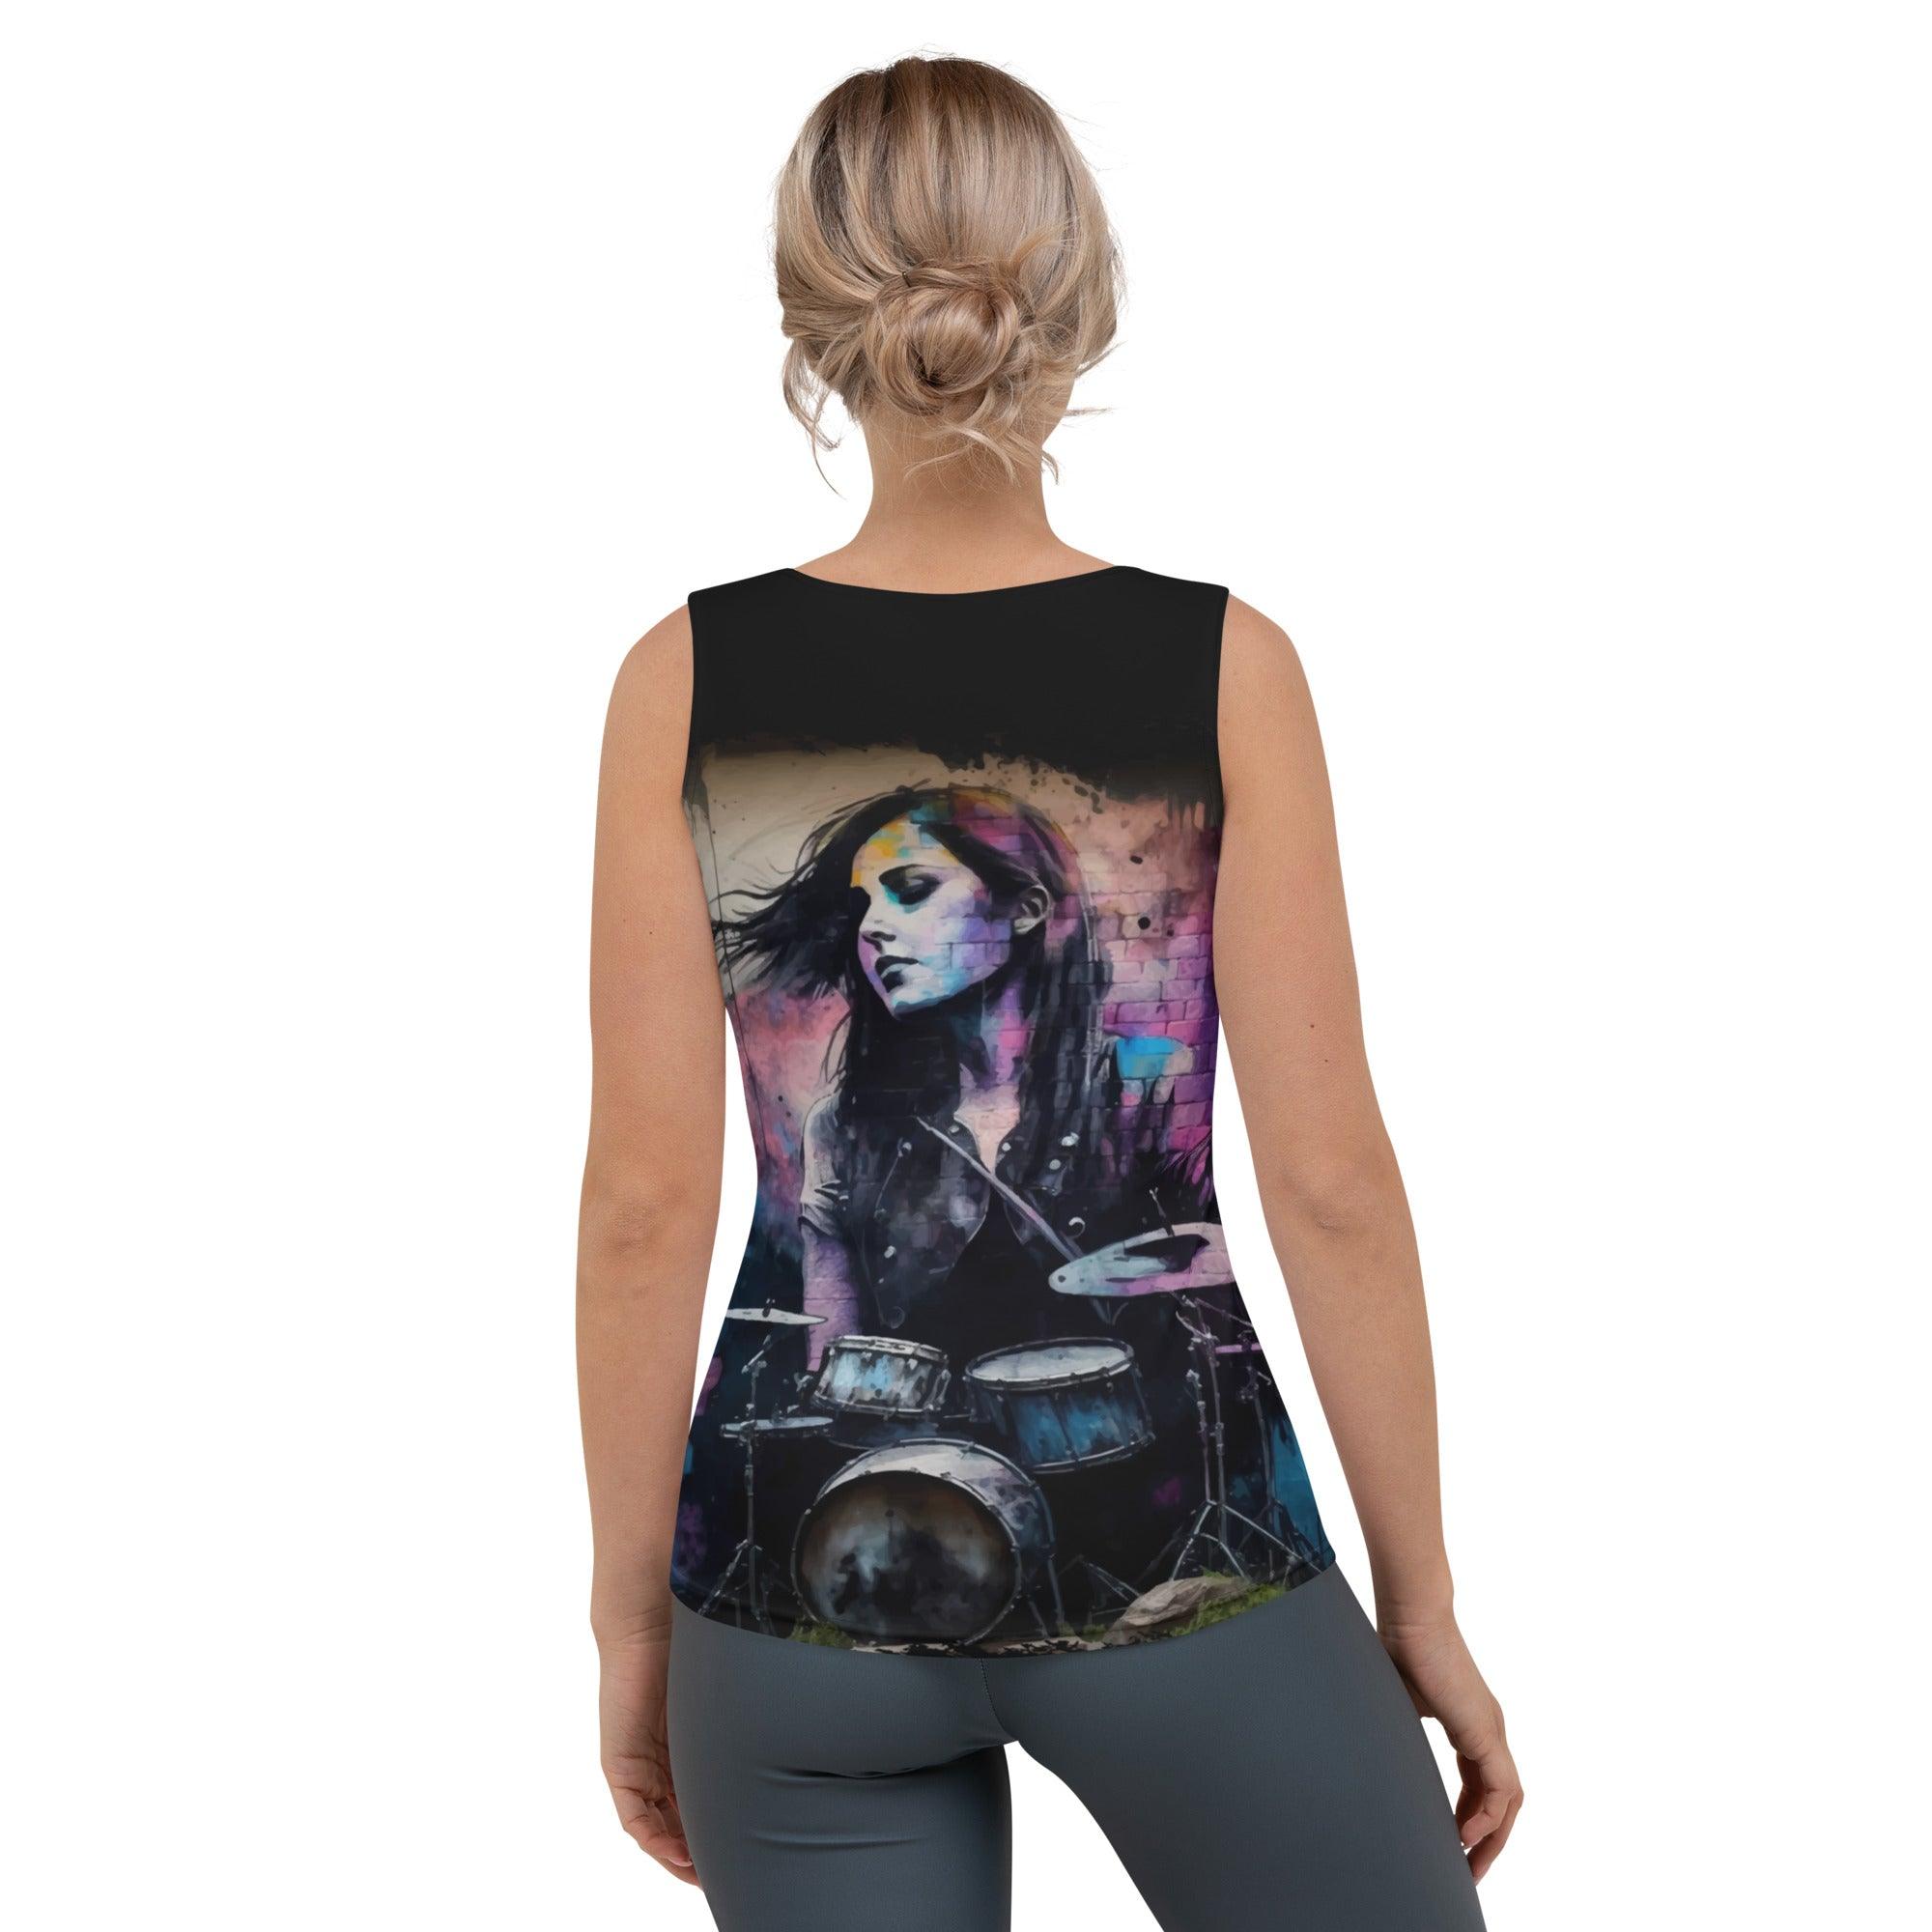 She Drums With Power Sublimation Cut & Sew Tank Top - Beyond T-shirts